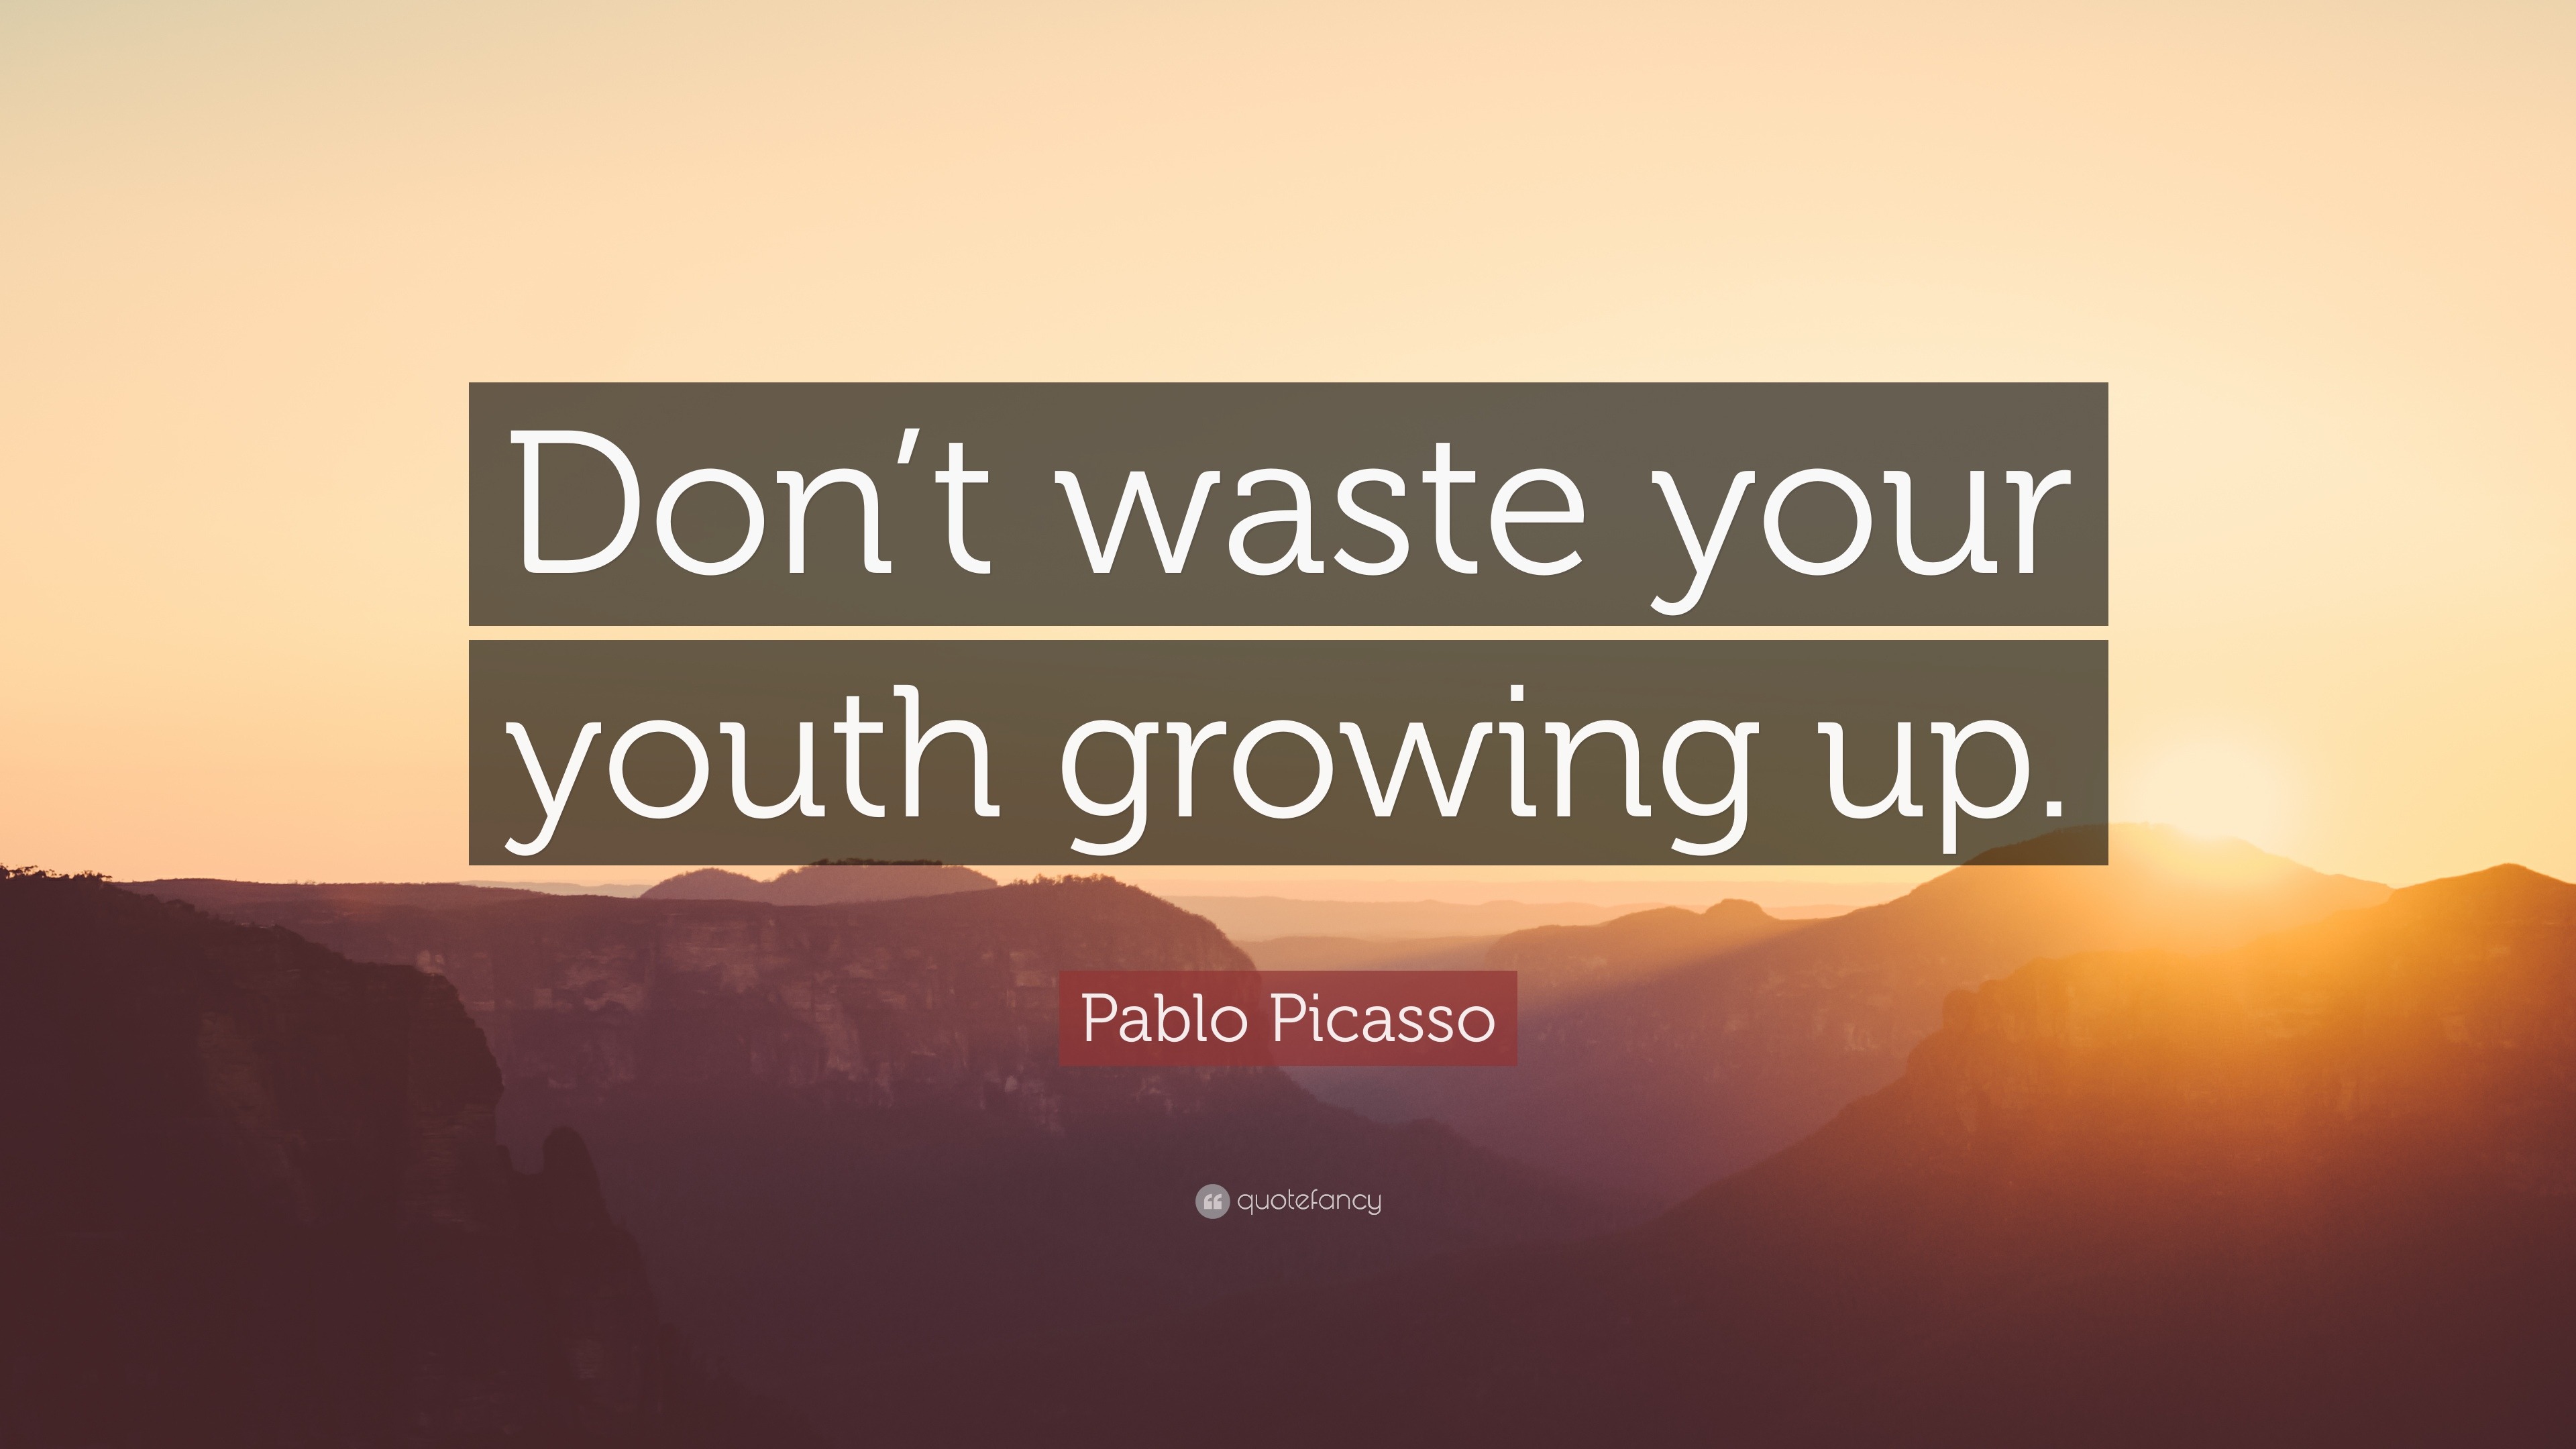 famous quotes about growing up